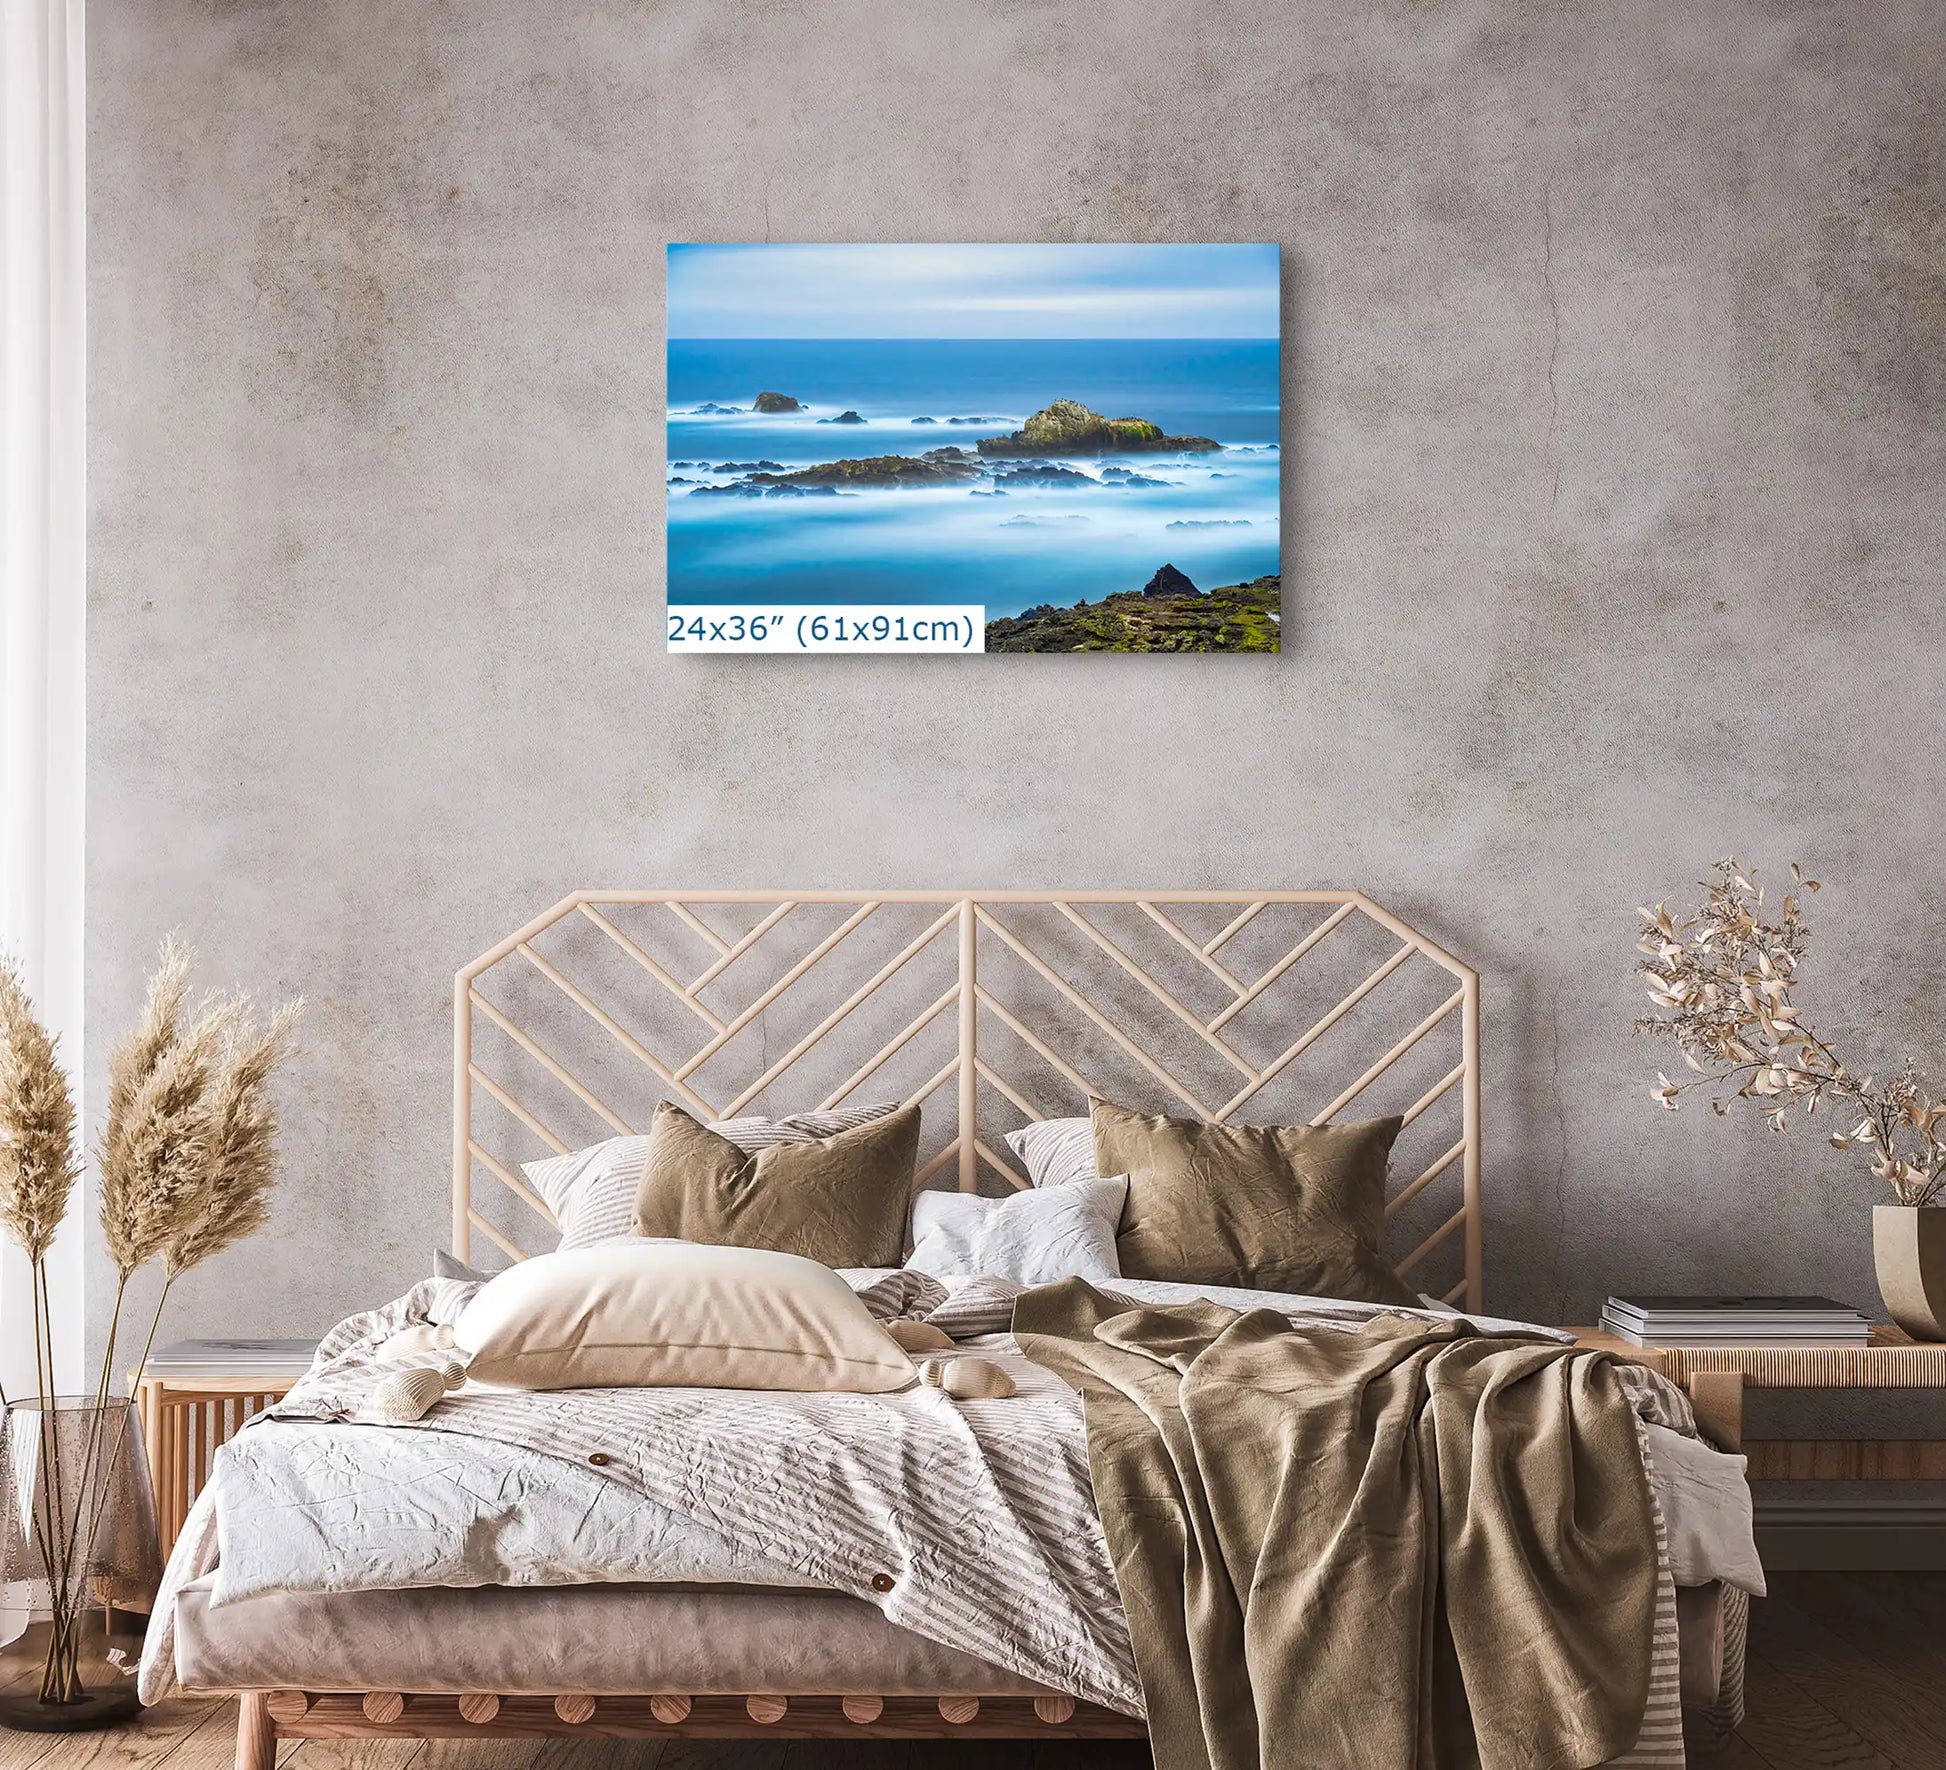 Point Lobos seascape in 24"x36" size, creating a peaceful backdrop above a bed, merging nature with restful decor.